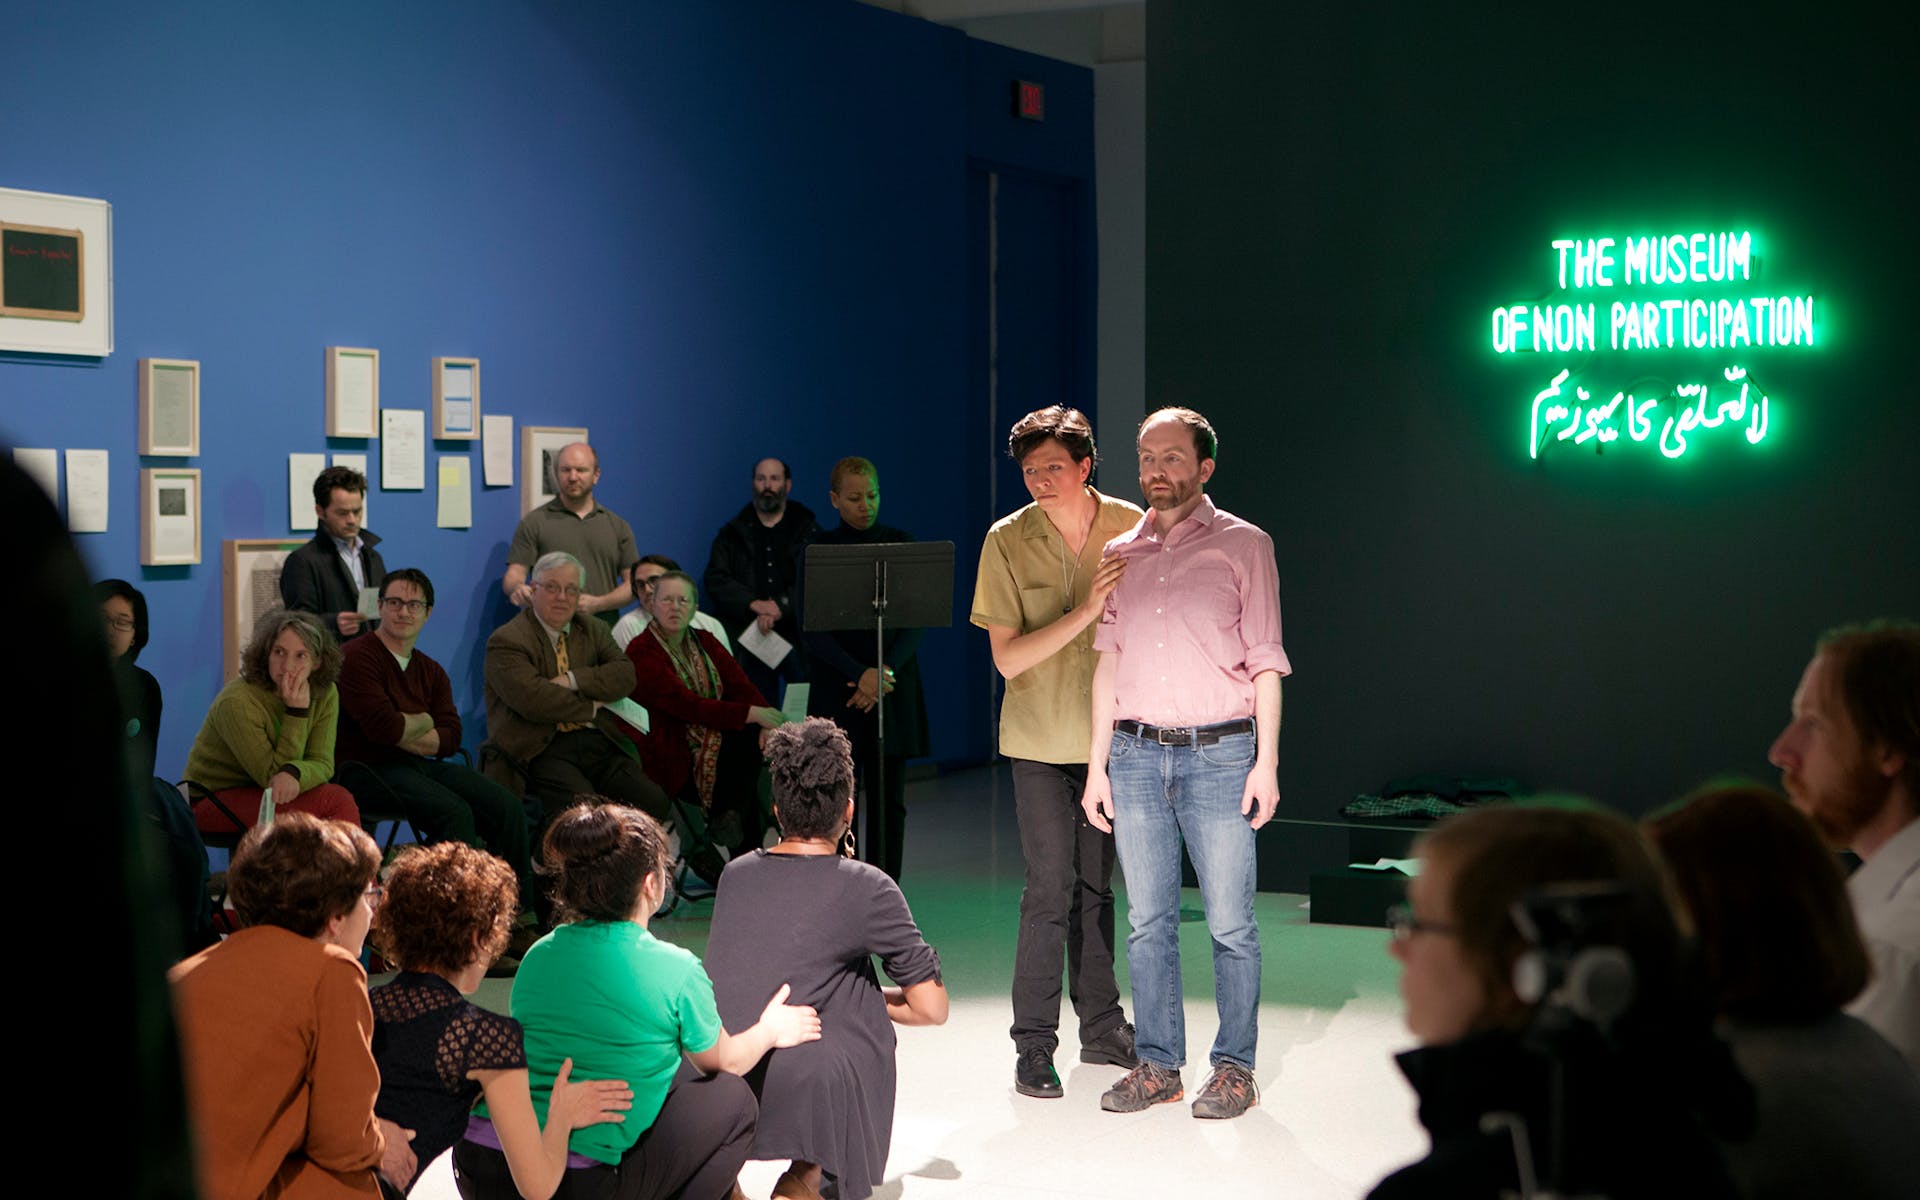 Opening of the exhibition, The Museum of Non Participation, 2013